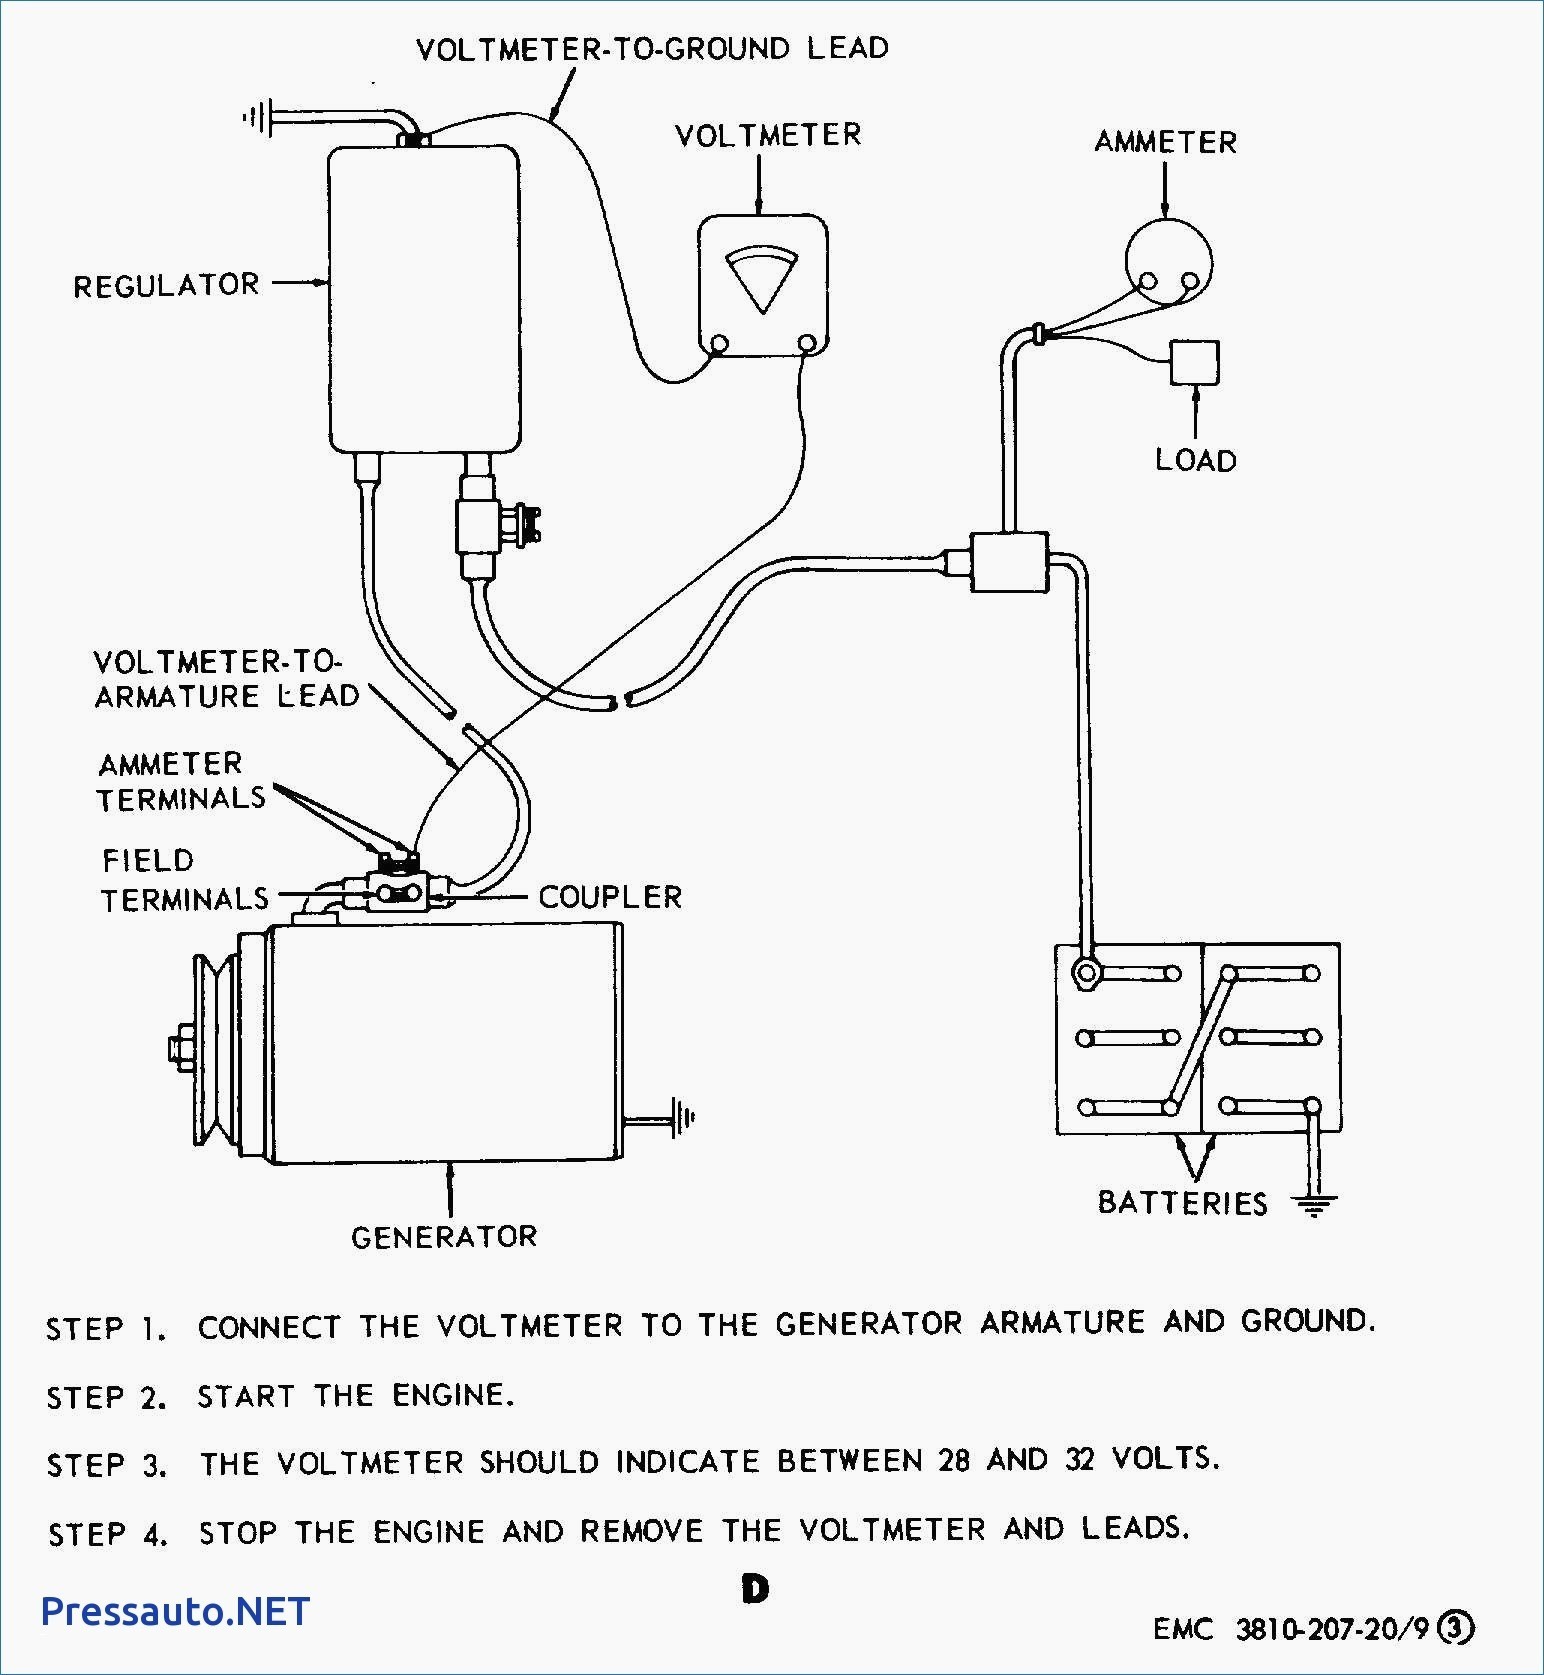 Wiring Diagram for 1 Wire Gm Alternator Refrence E Wire Alternator Wiring Diagram Unique 3 Wire